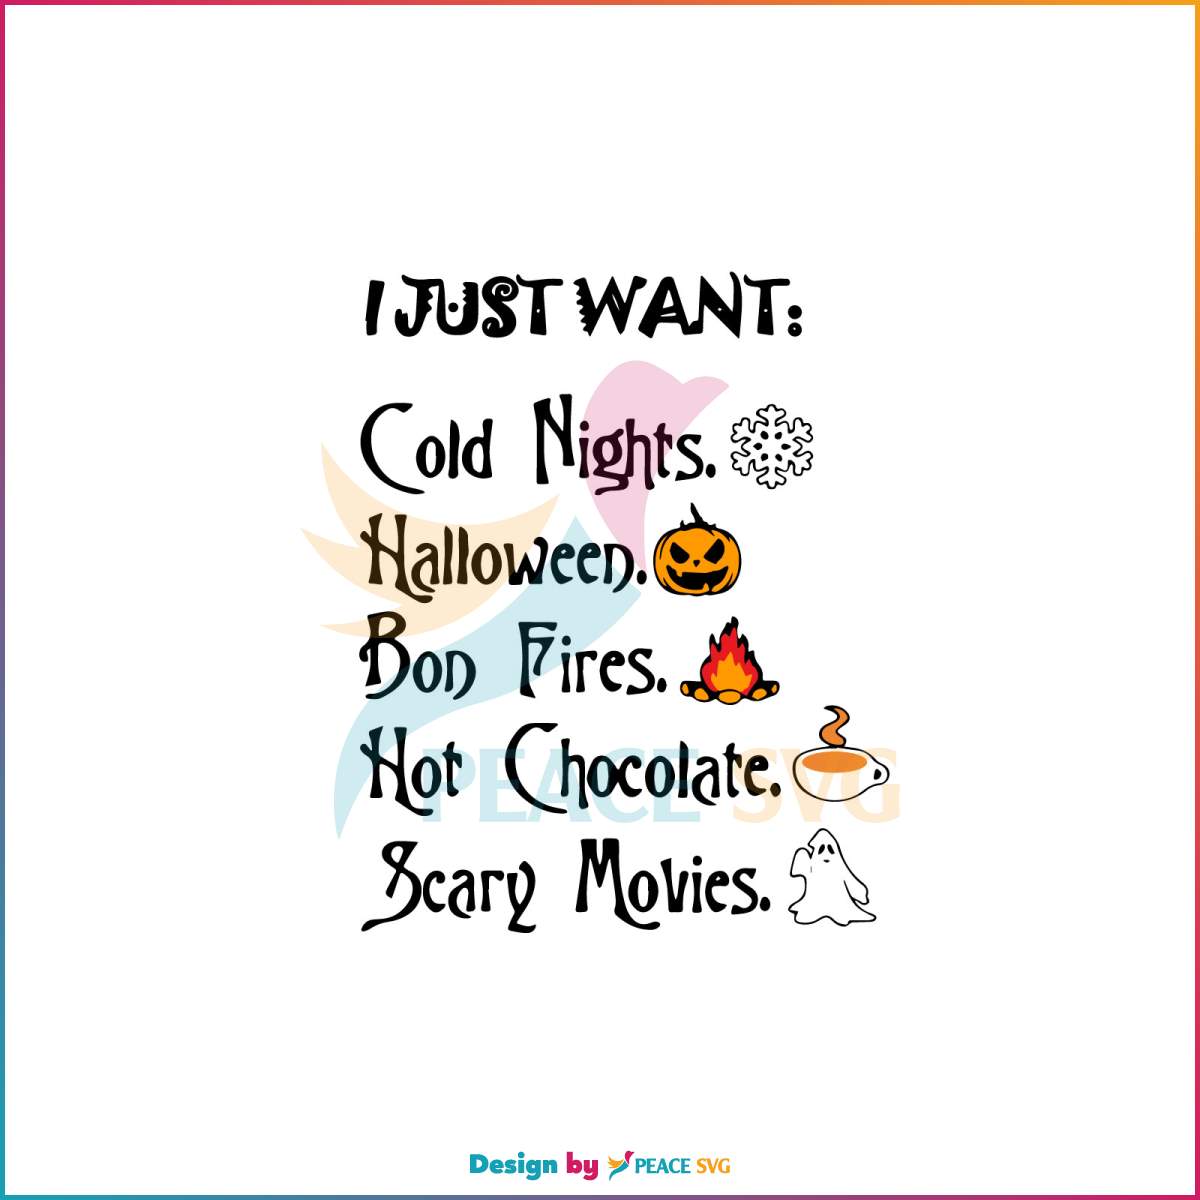 cold-nights-halloween-bonfires-scary-movies-svg-file